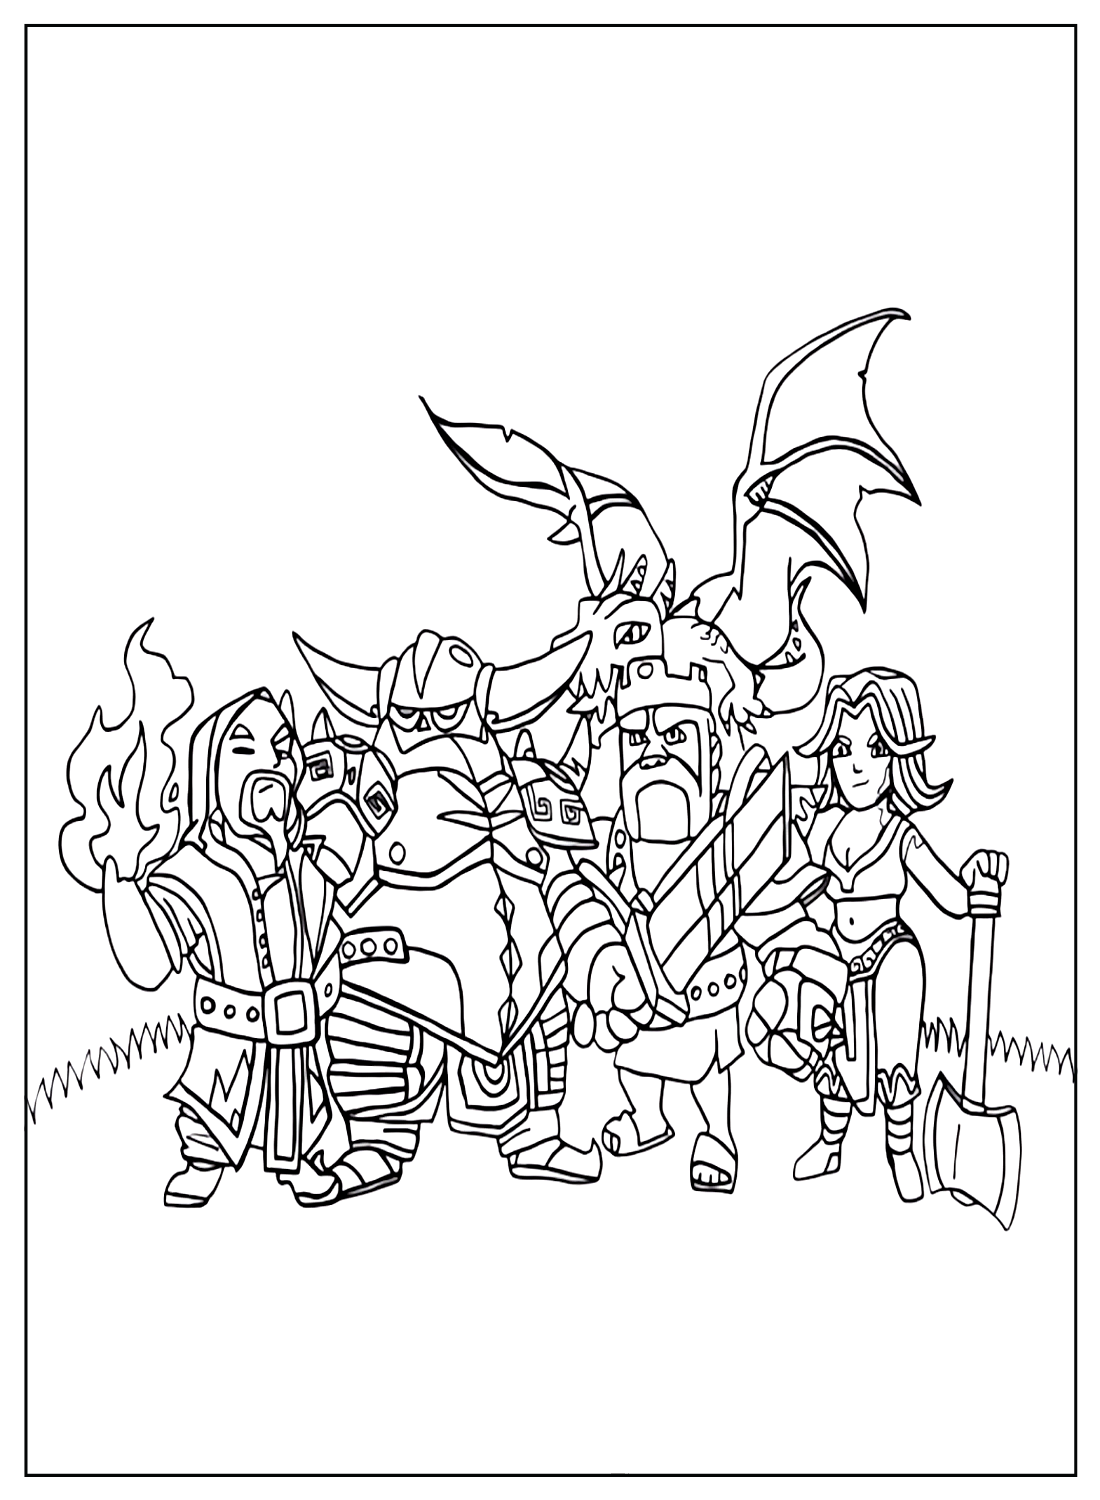 Coloring Sheets Clash of Clans from Clash of Clans